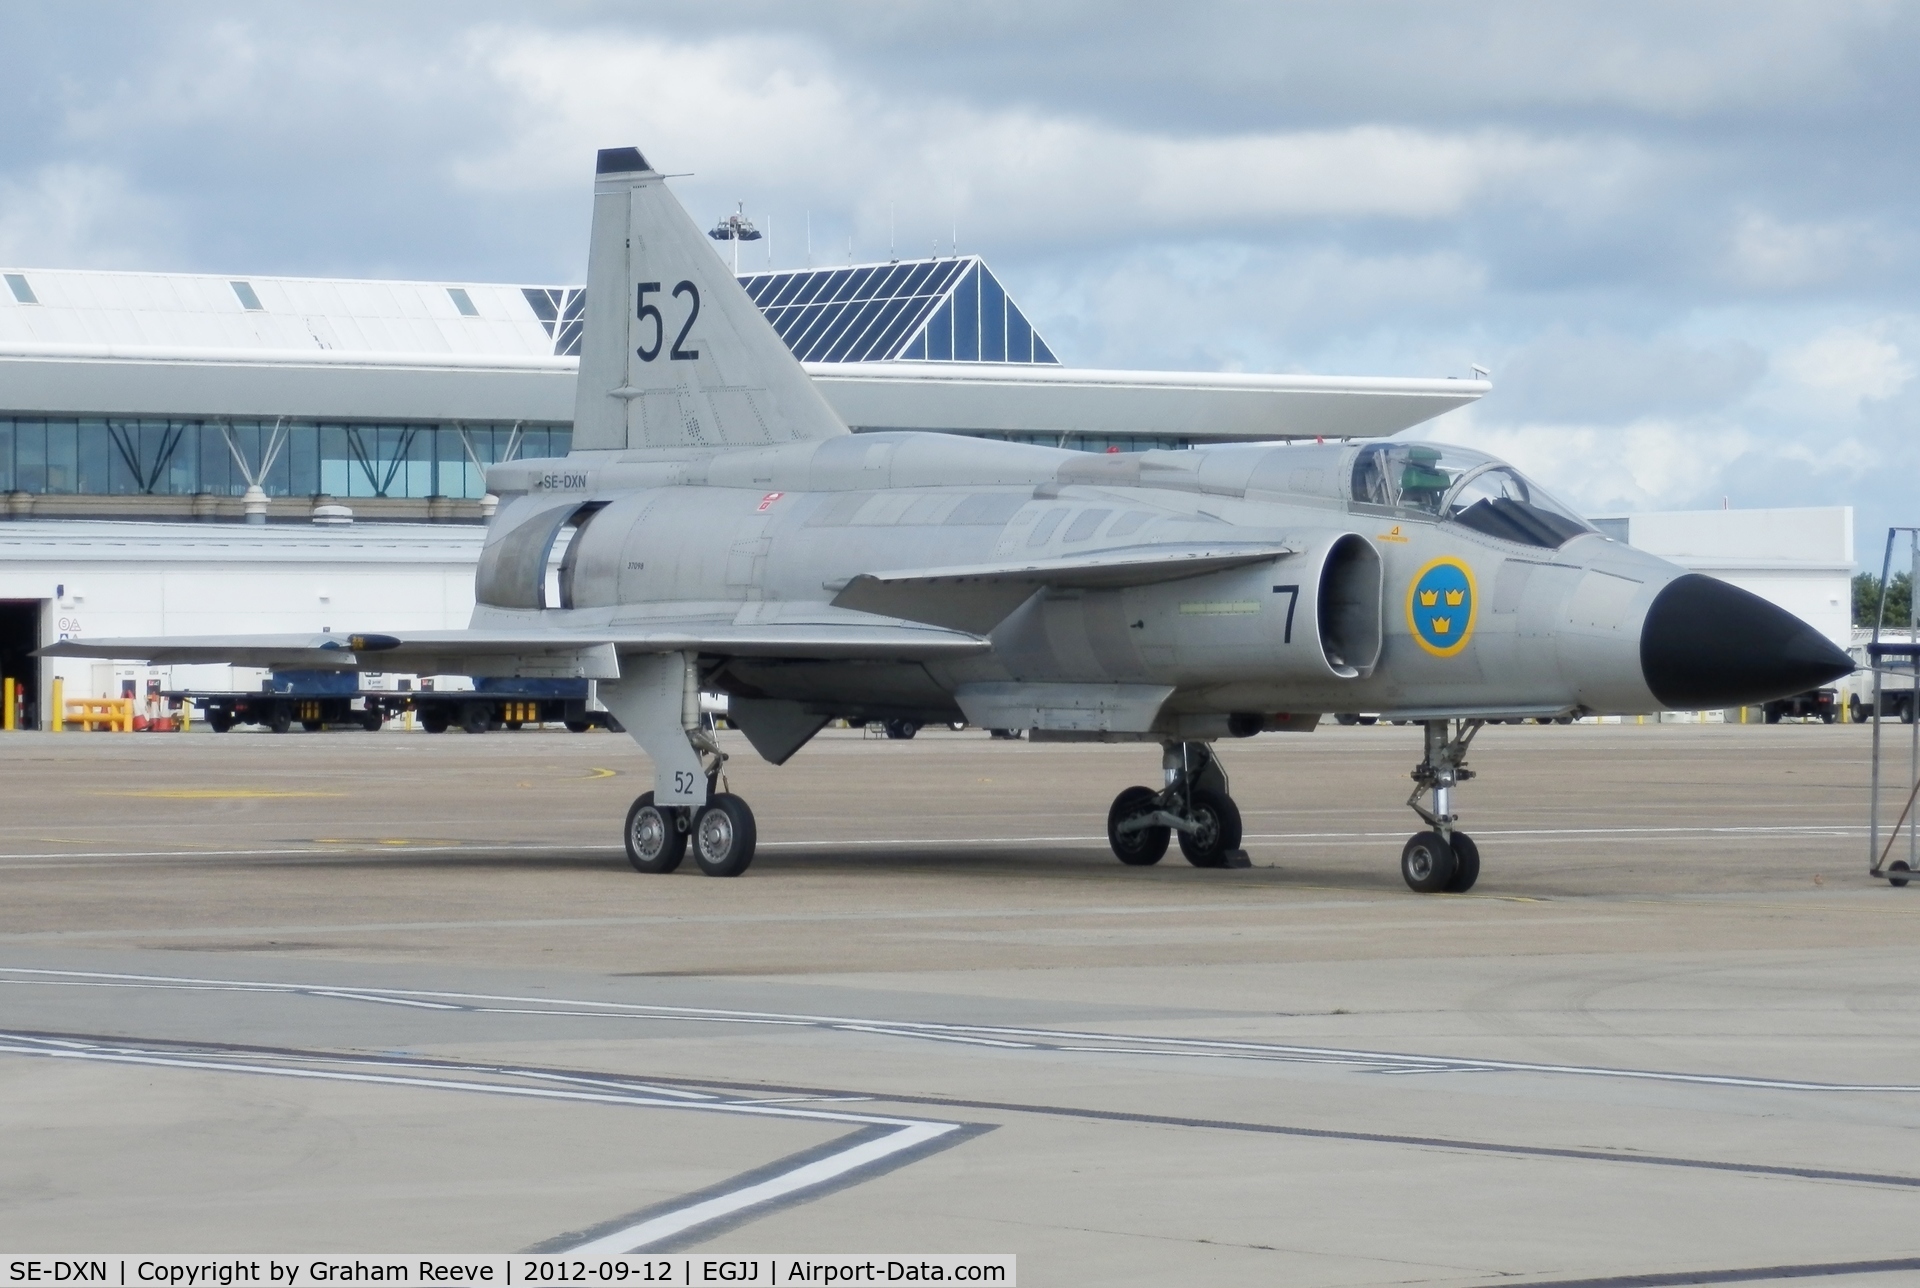 SE-DXN, 1977 Saab AJS 37 Viggen C/N 37098, Ready for the 2012 Jersey Air Show.